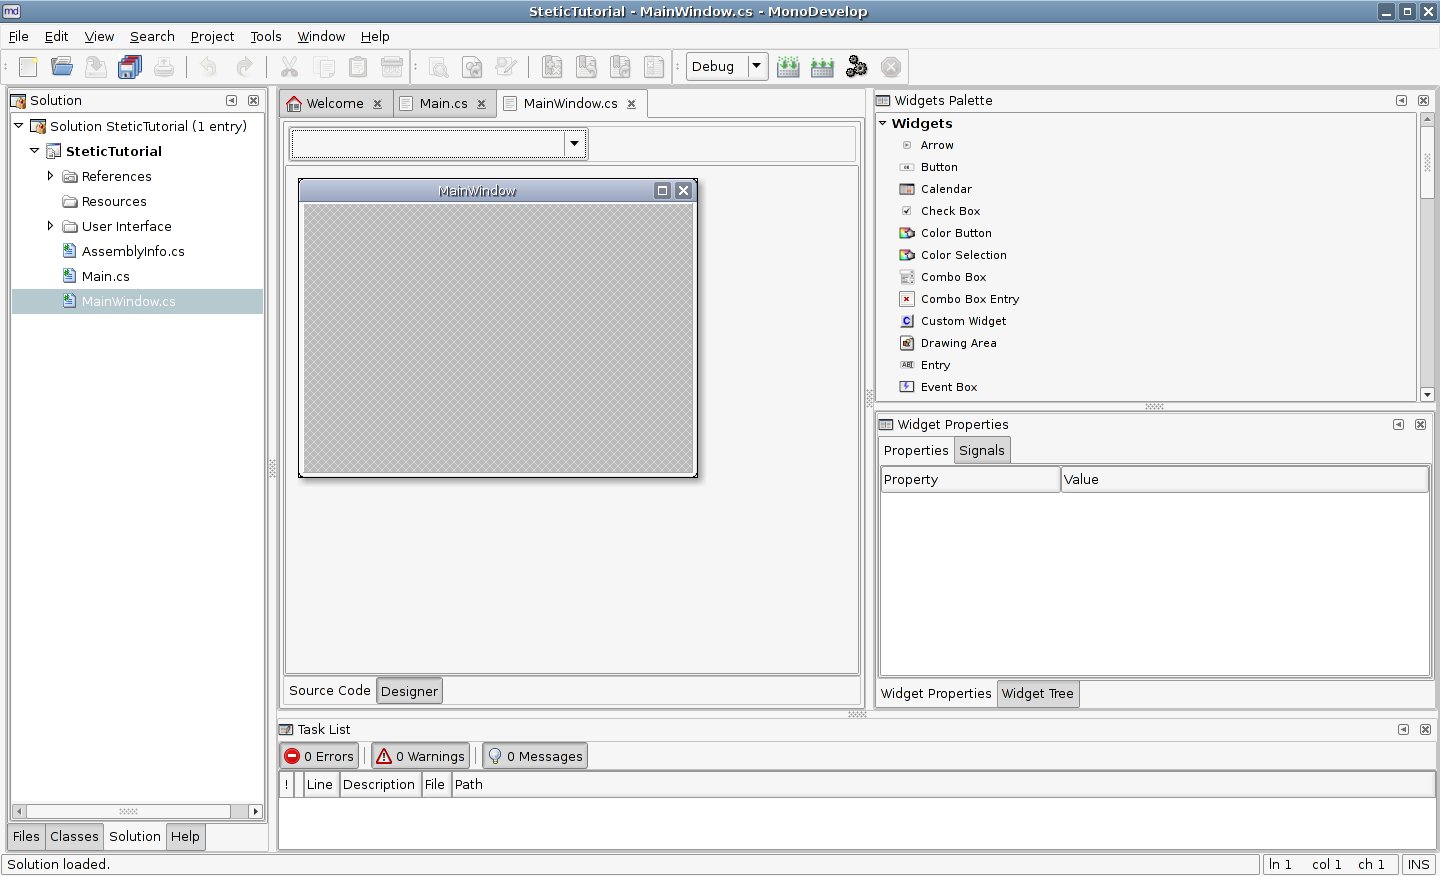 Image showing interace of MonoDevelop